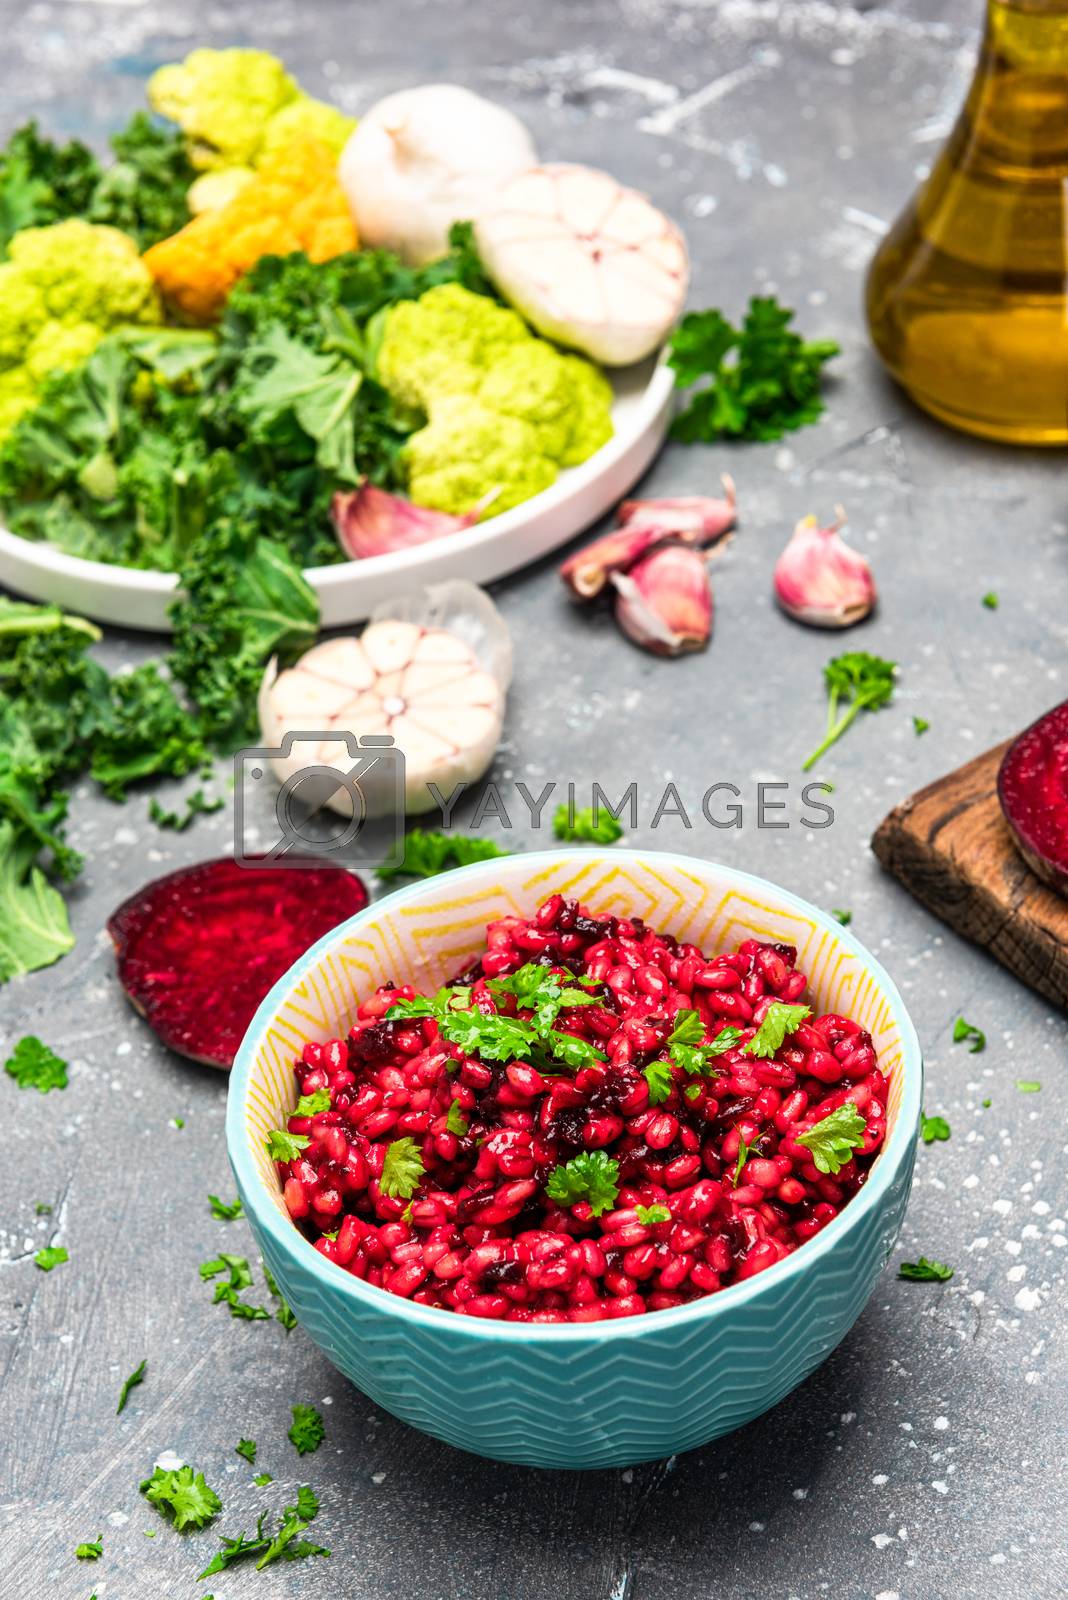 Royalty free image of Cooking Vegetarian Plant Based Food. Buckwheat Groats with Beetr by merc67